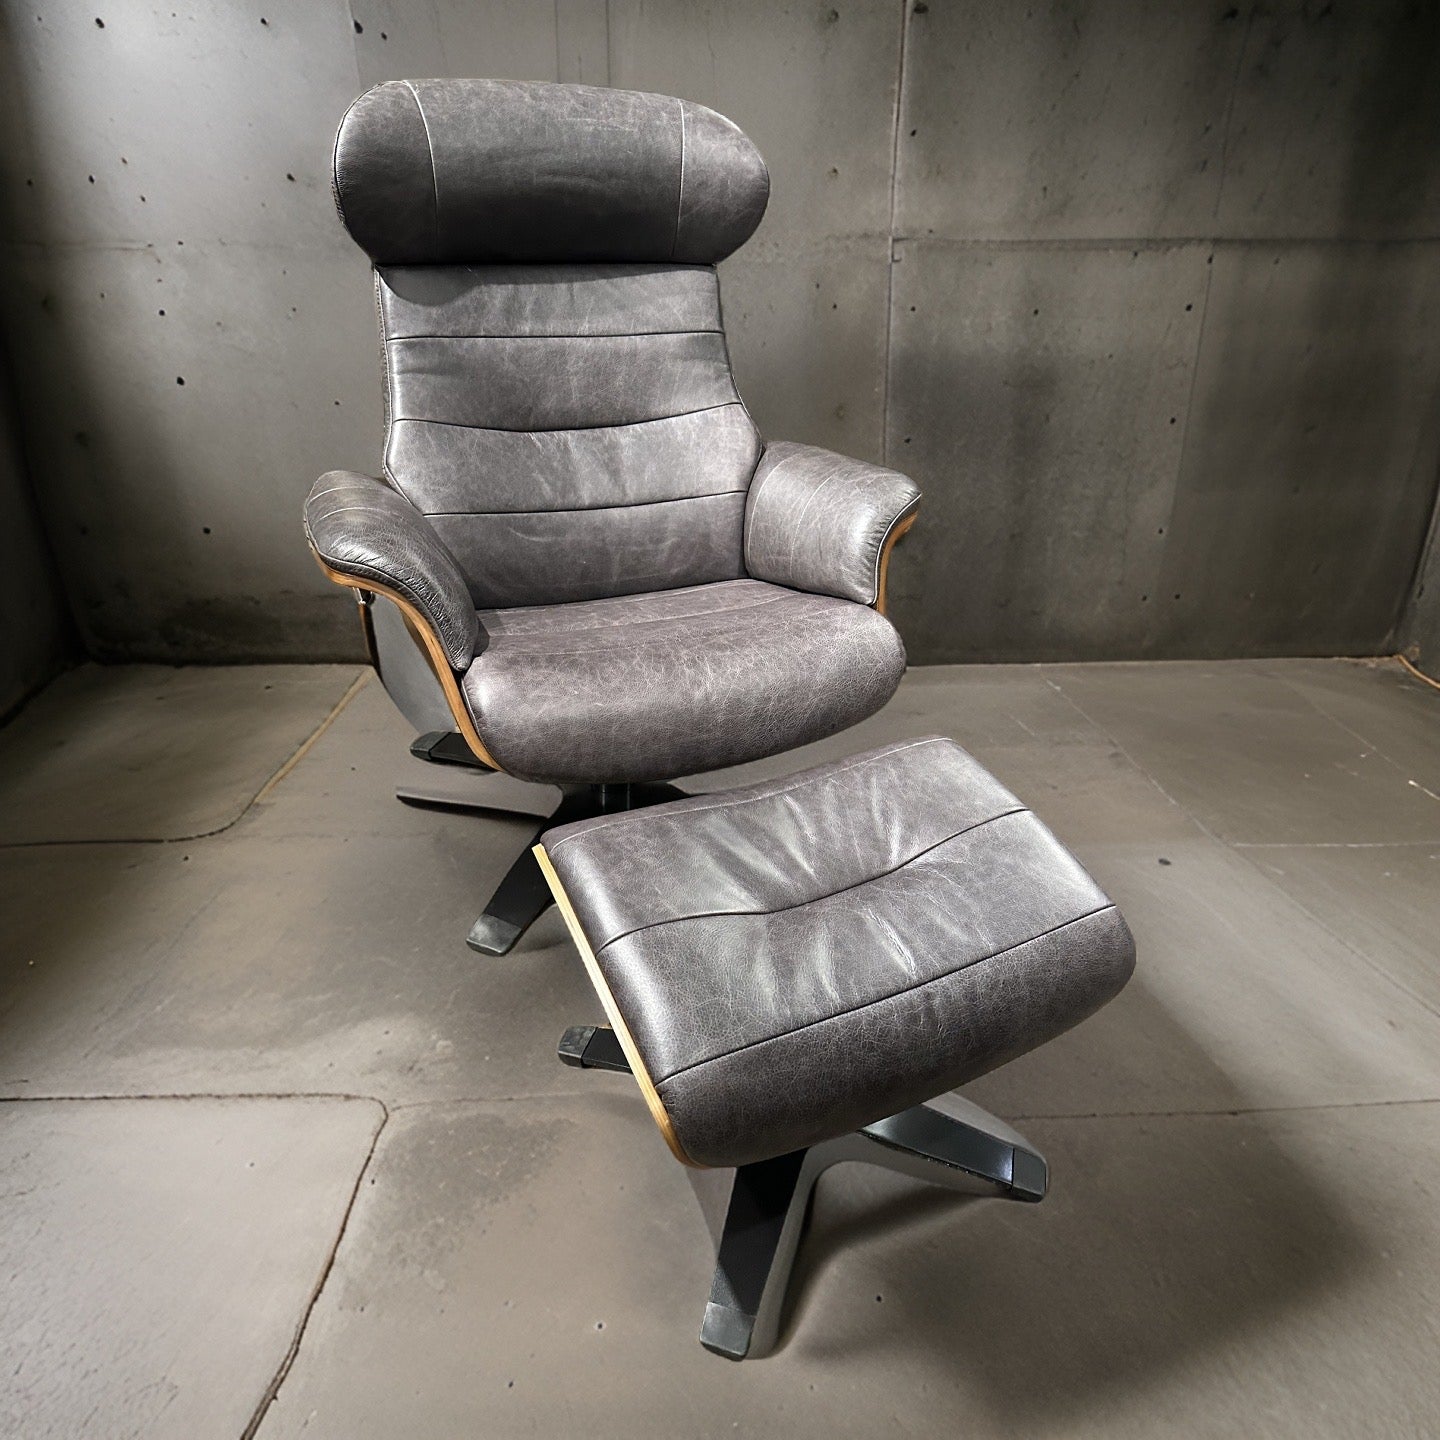 HLHF A928-1(2A)+0 Lounge Chair & Ottoman - Charcoal Accent Chairs Furniture Store Burlington Ontario Near Me 